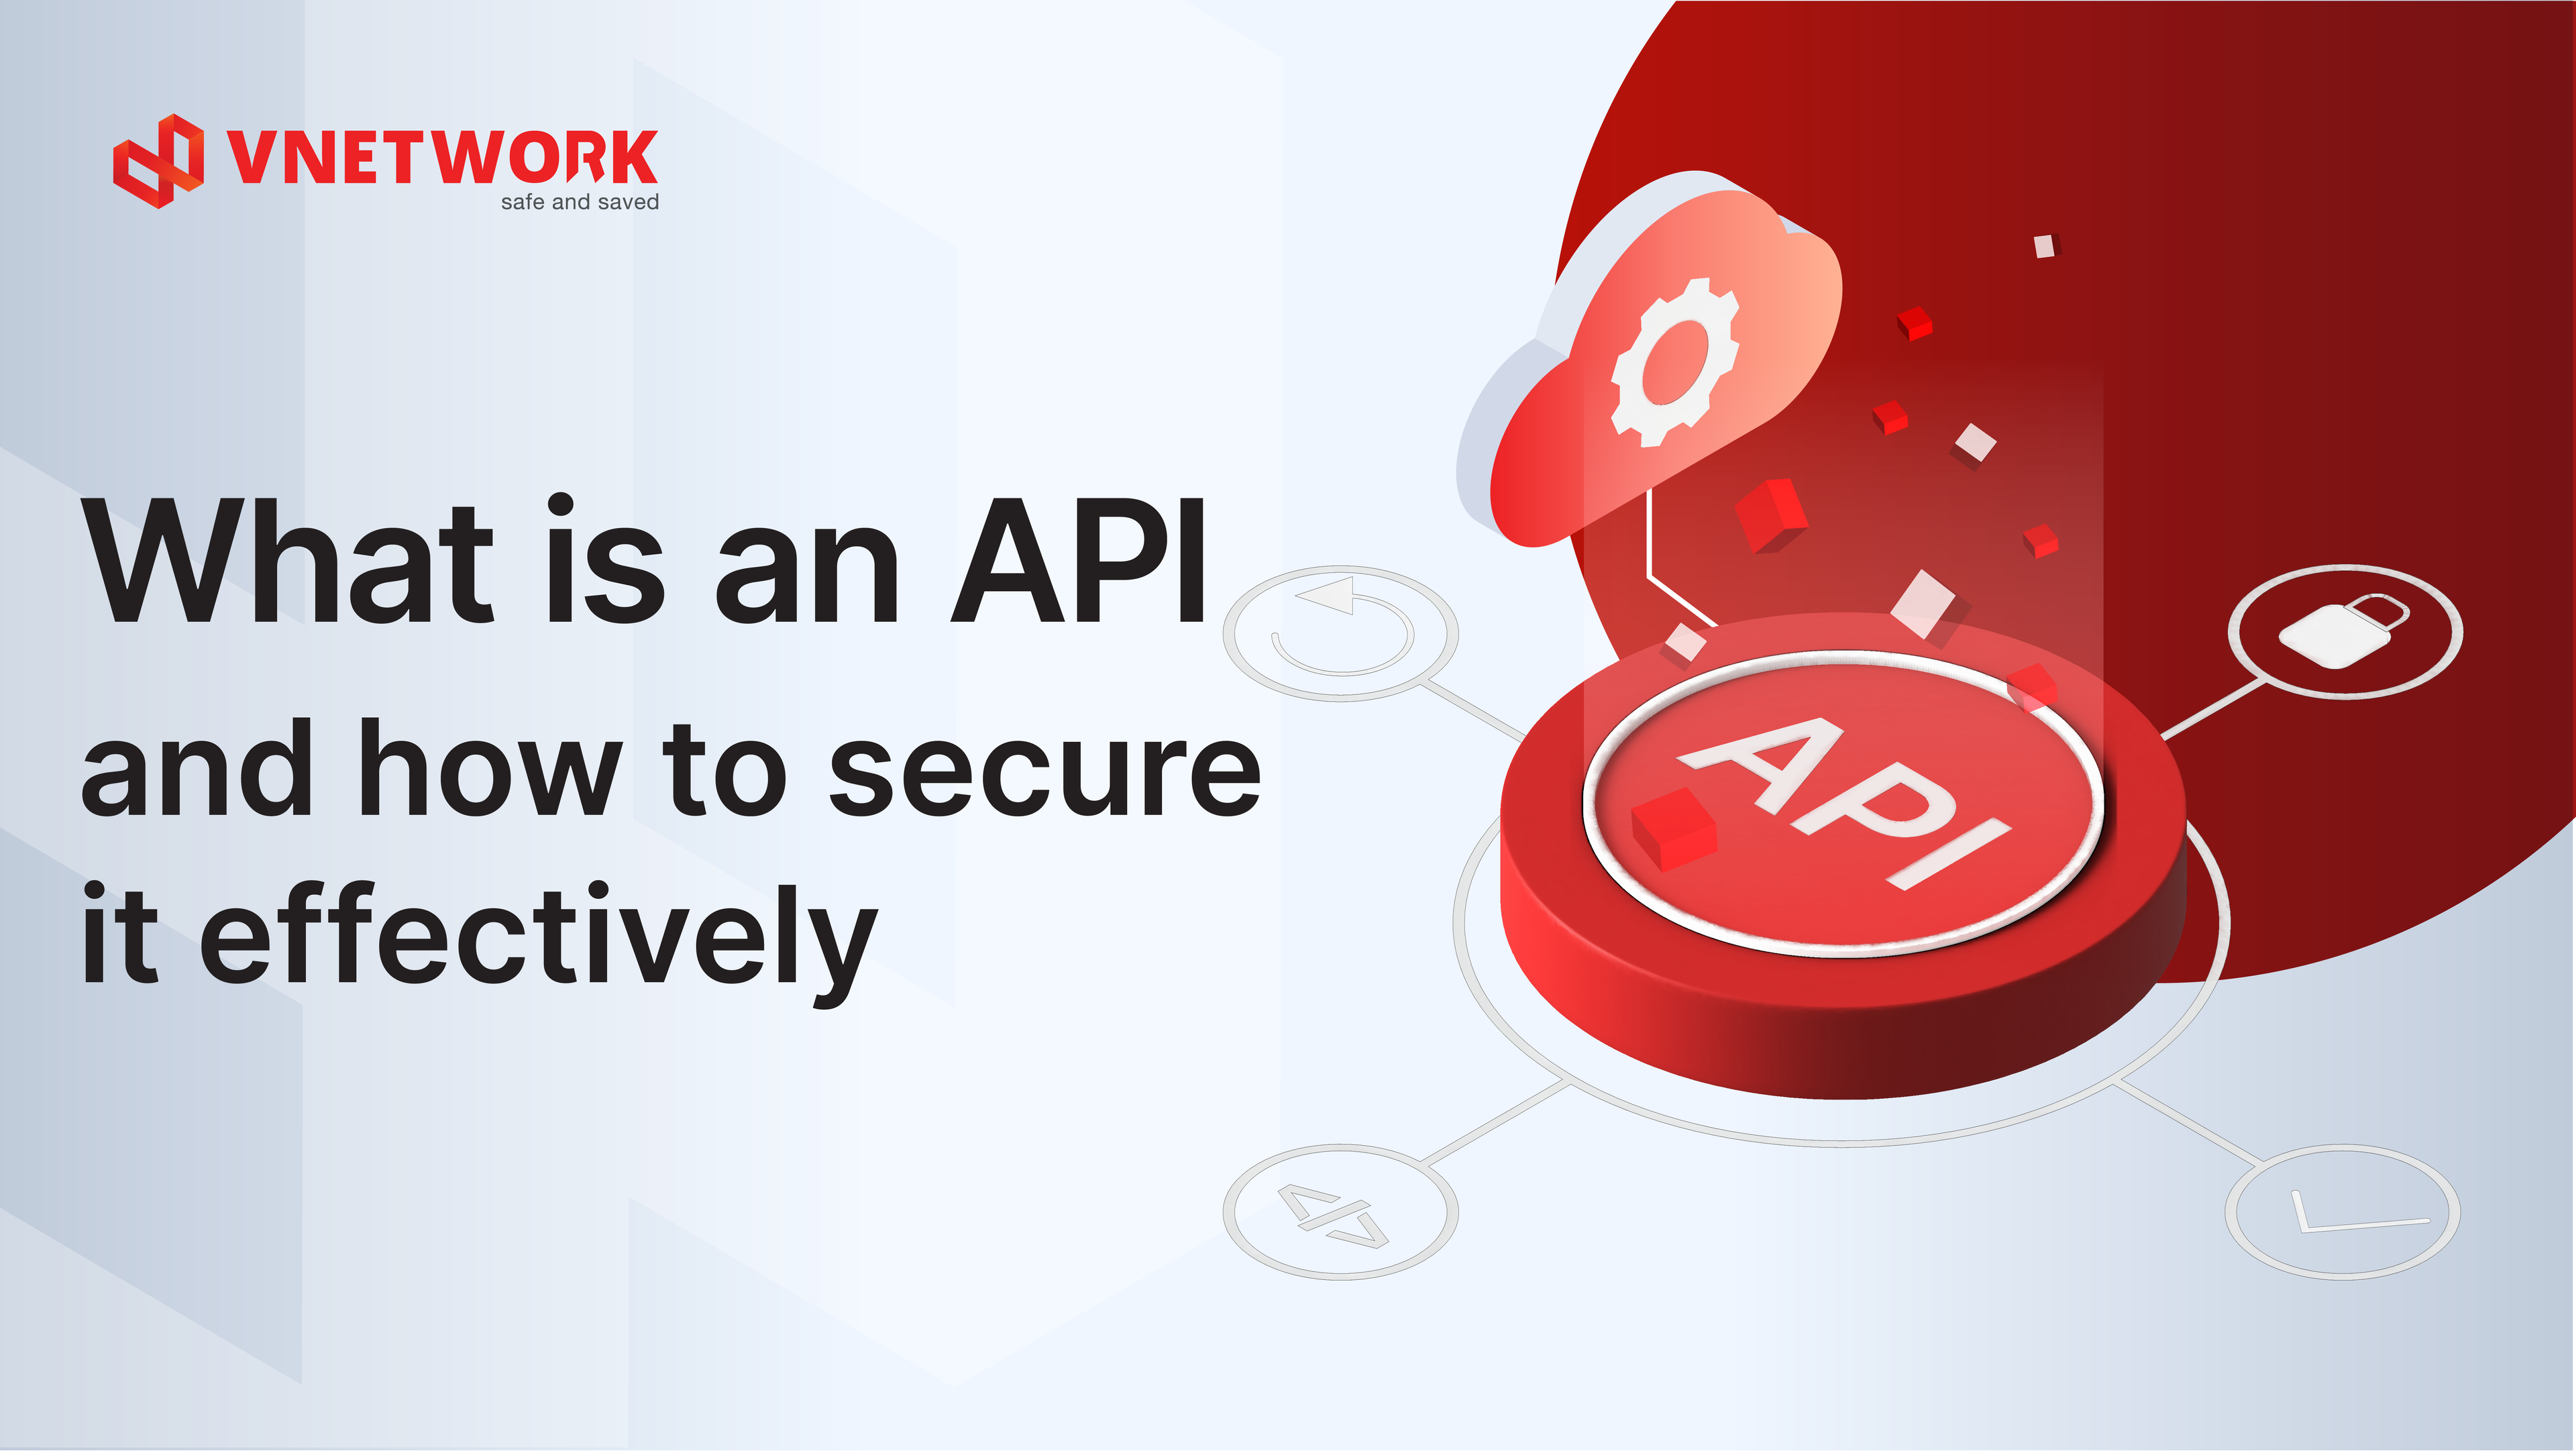 What is an API and how to secure it effectively